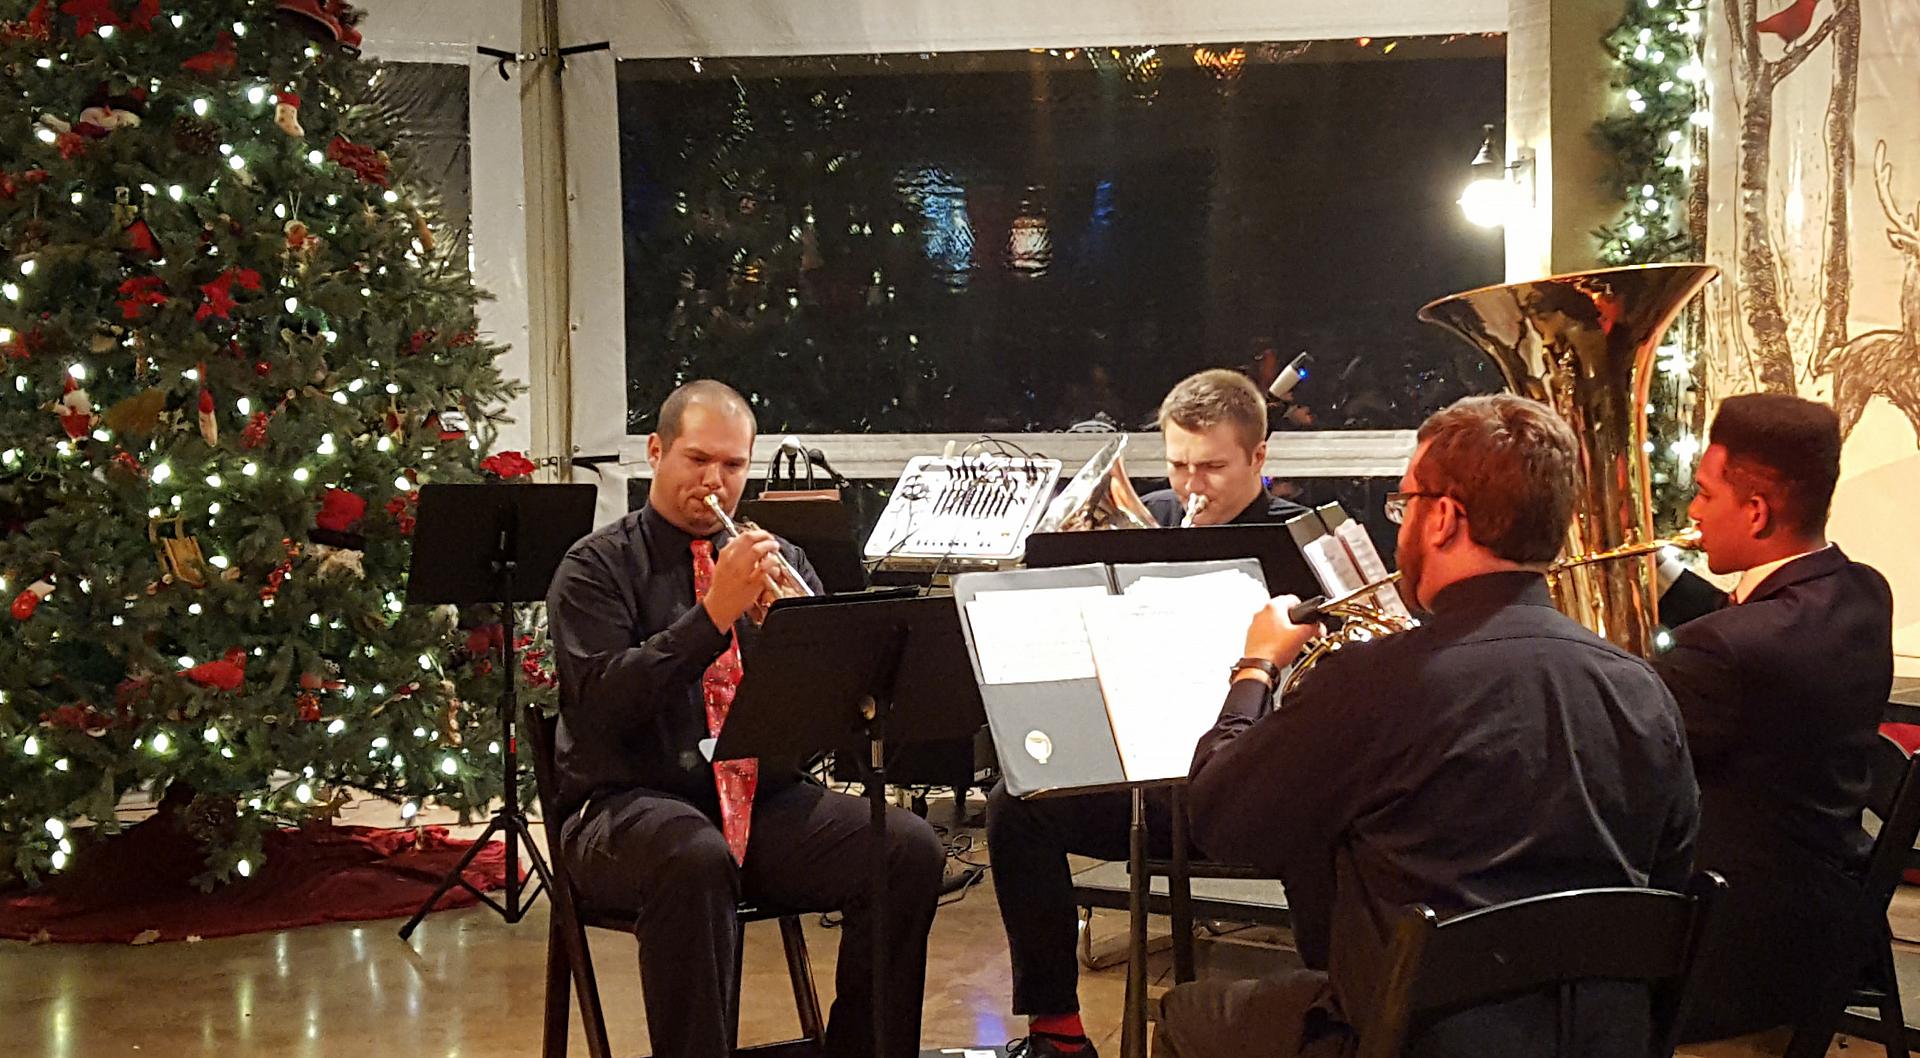 Four individuals play brass instruments in a room decorated for Christmas